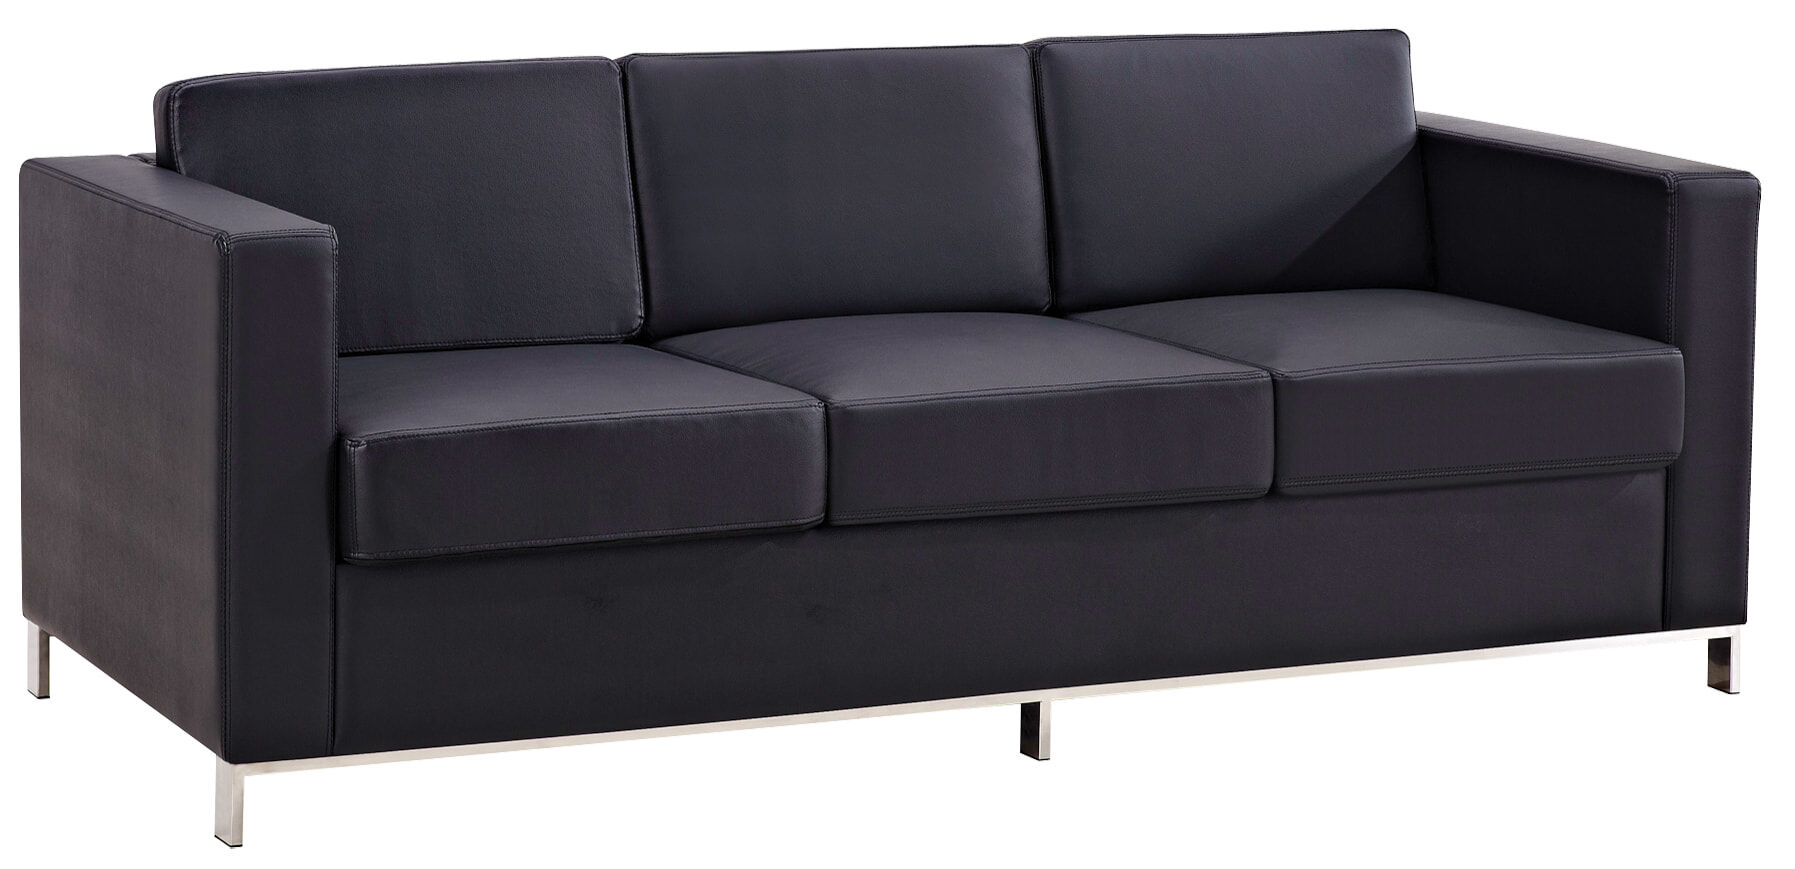 Cube 3 Seater